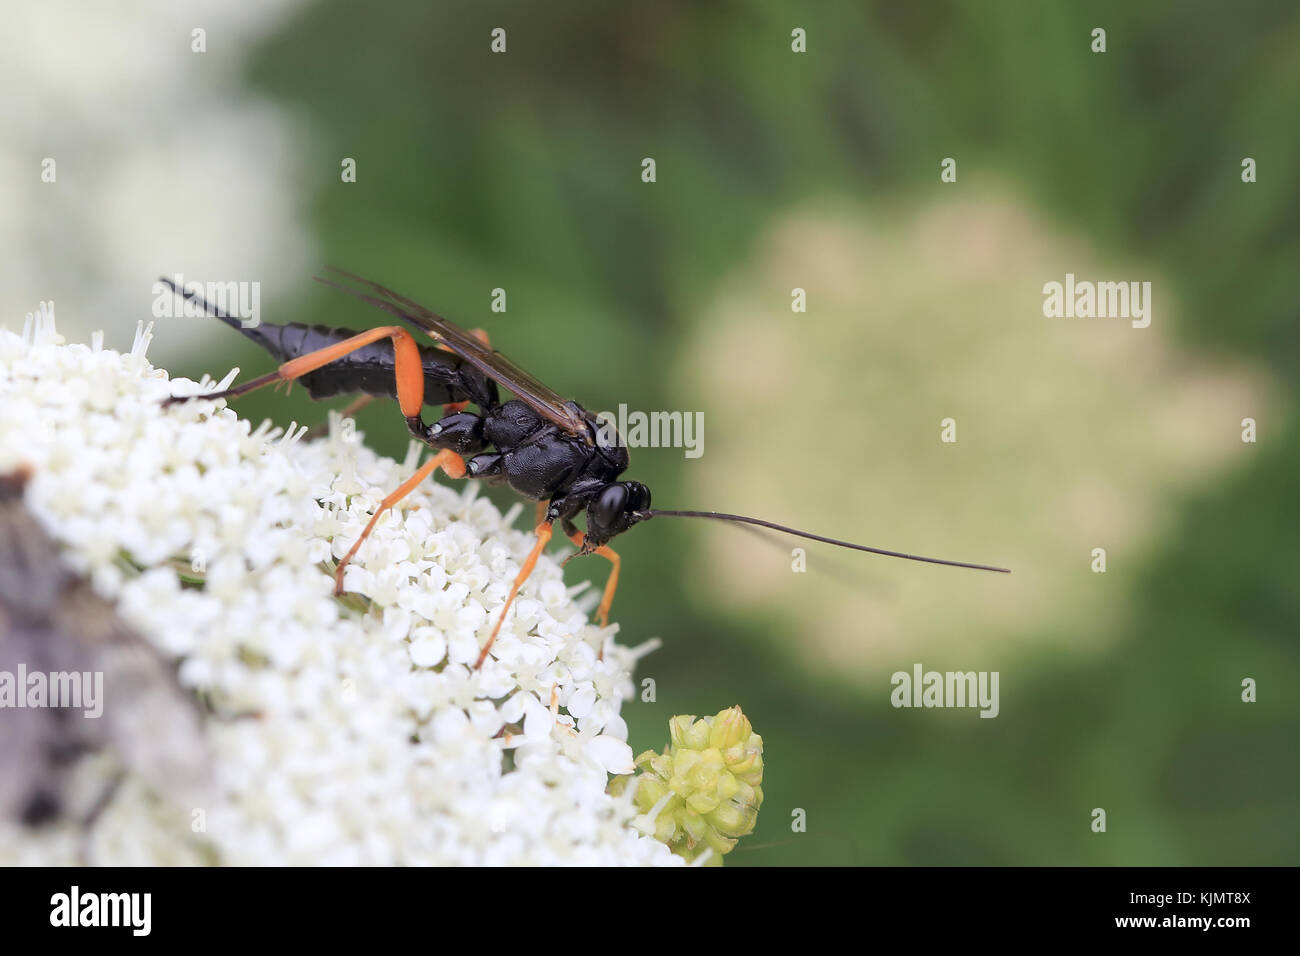 A large female Sirex Wood Wasp, Isles of Scilly, Cornwall, UK. Stock Photo